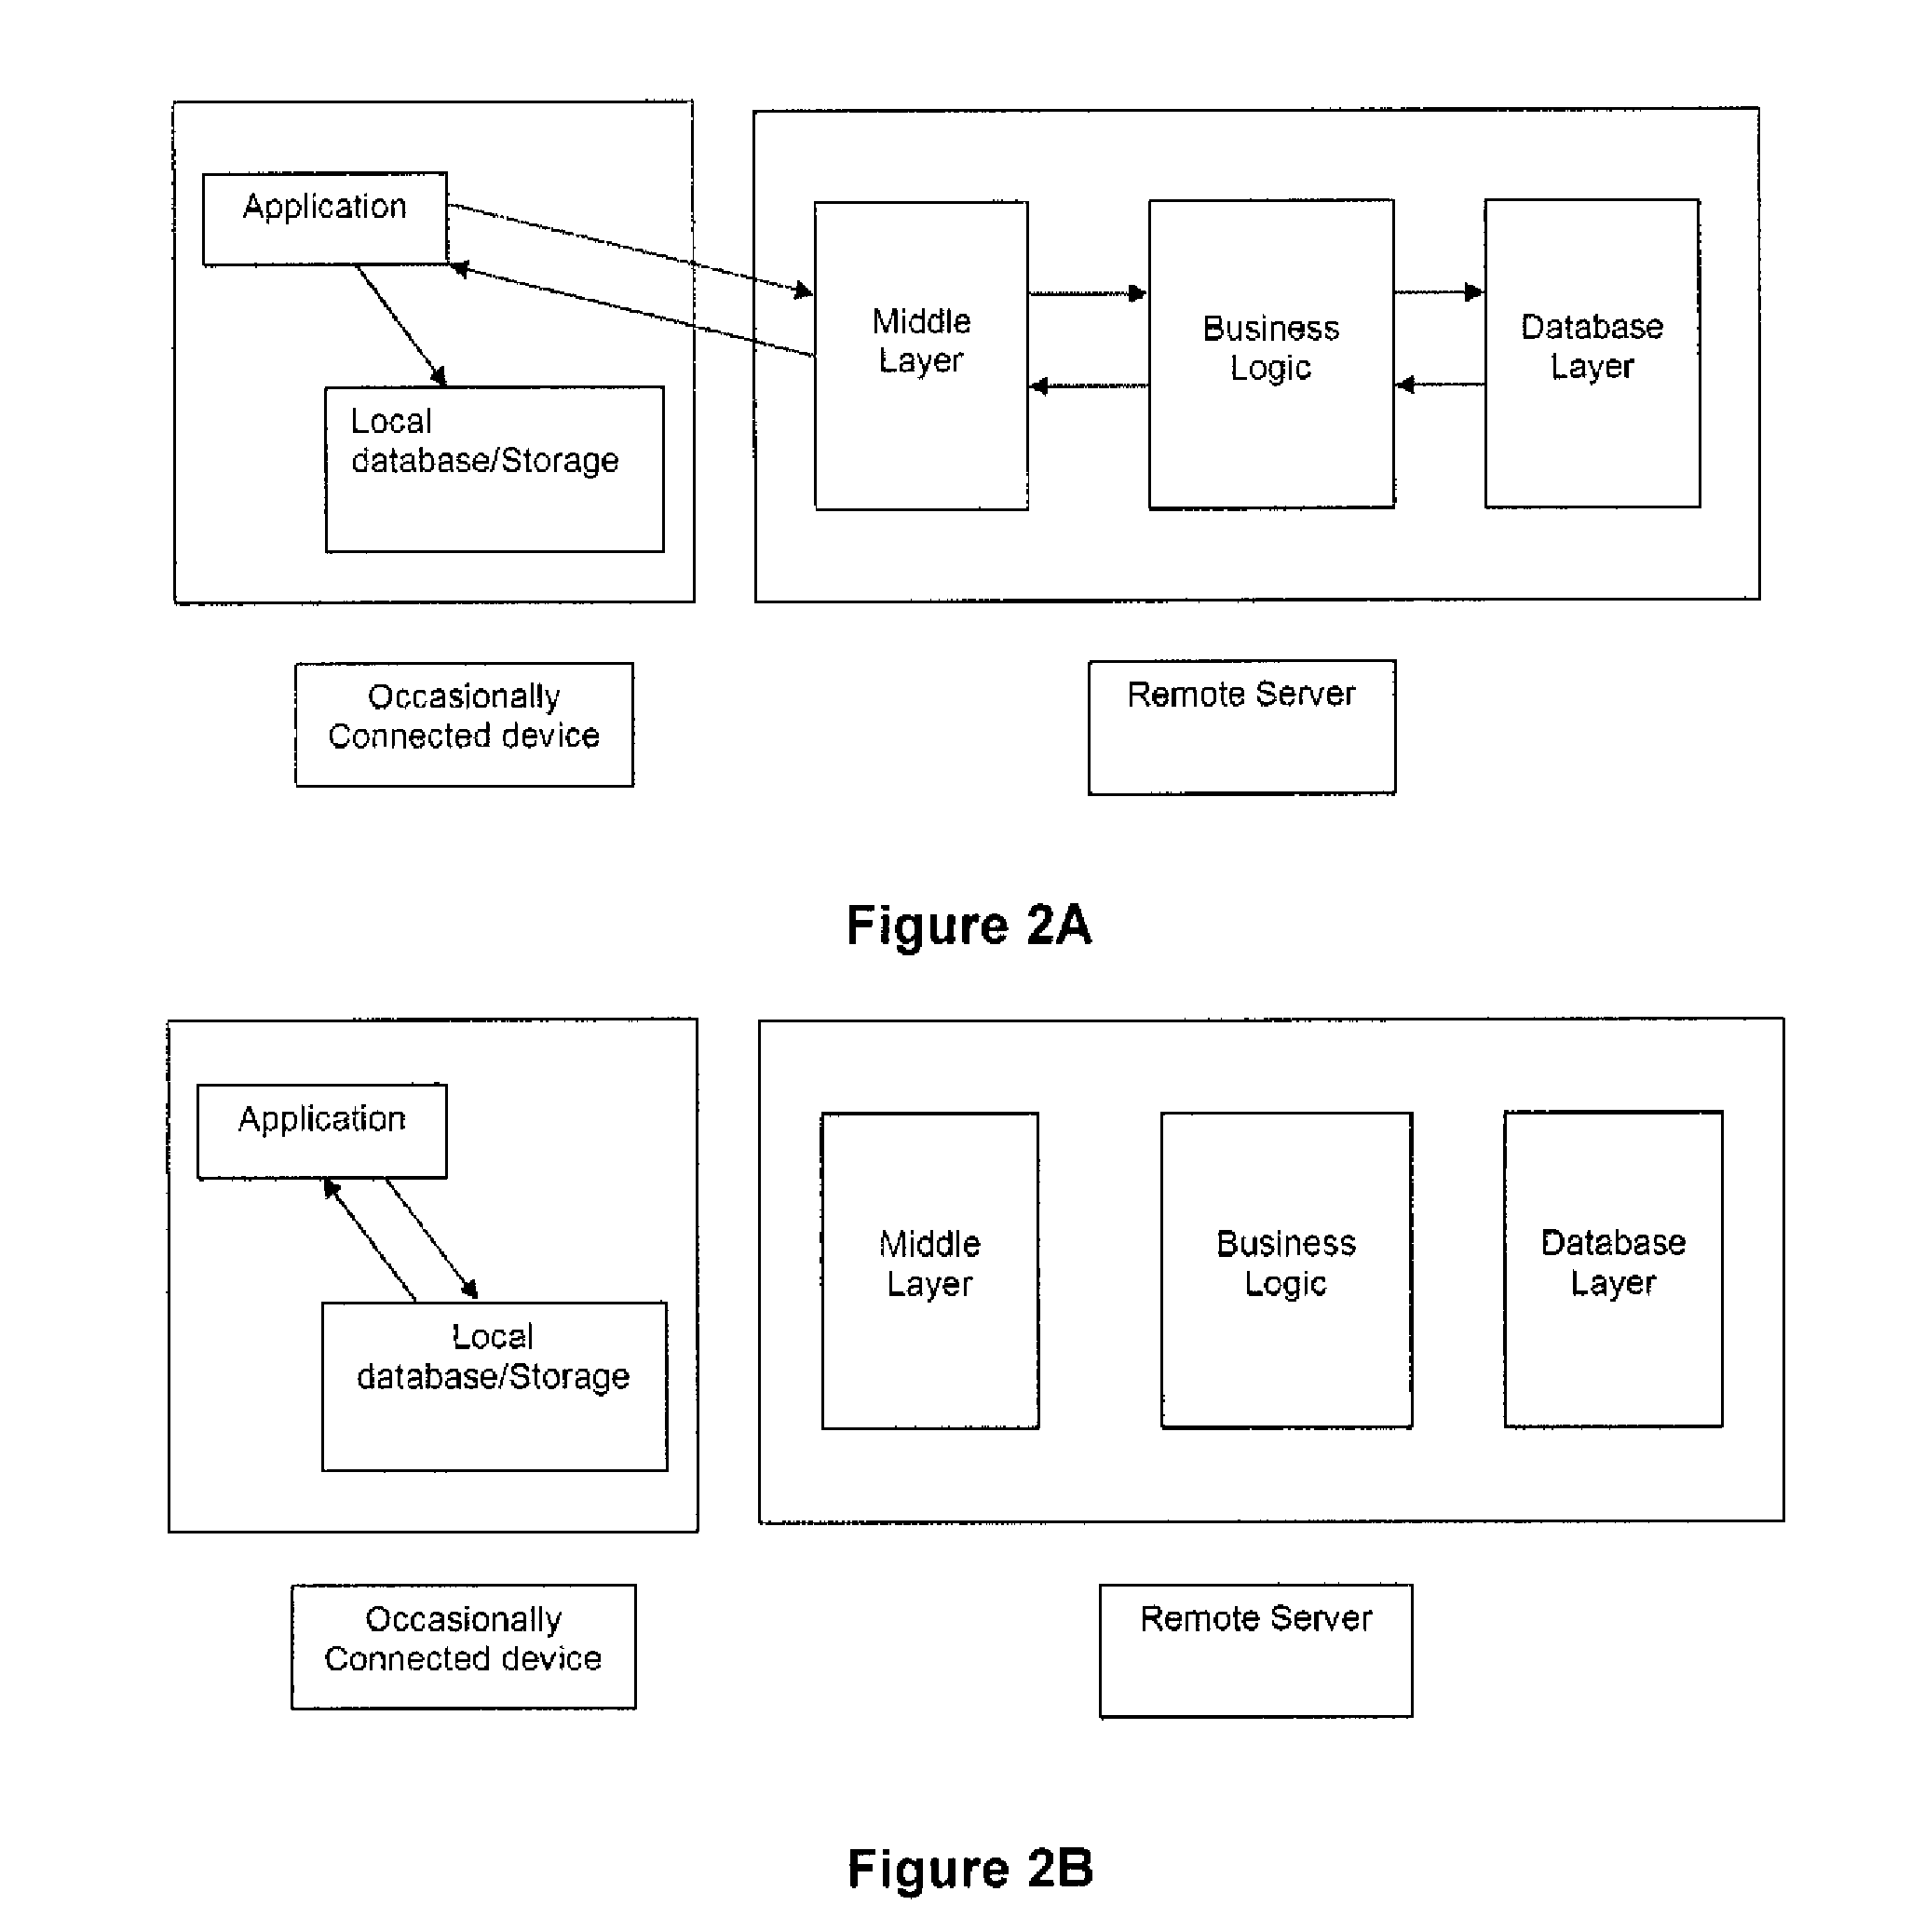 System and Method for Sharing Data Between Occasionally Connected Devices and Remote Global Database